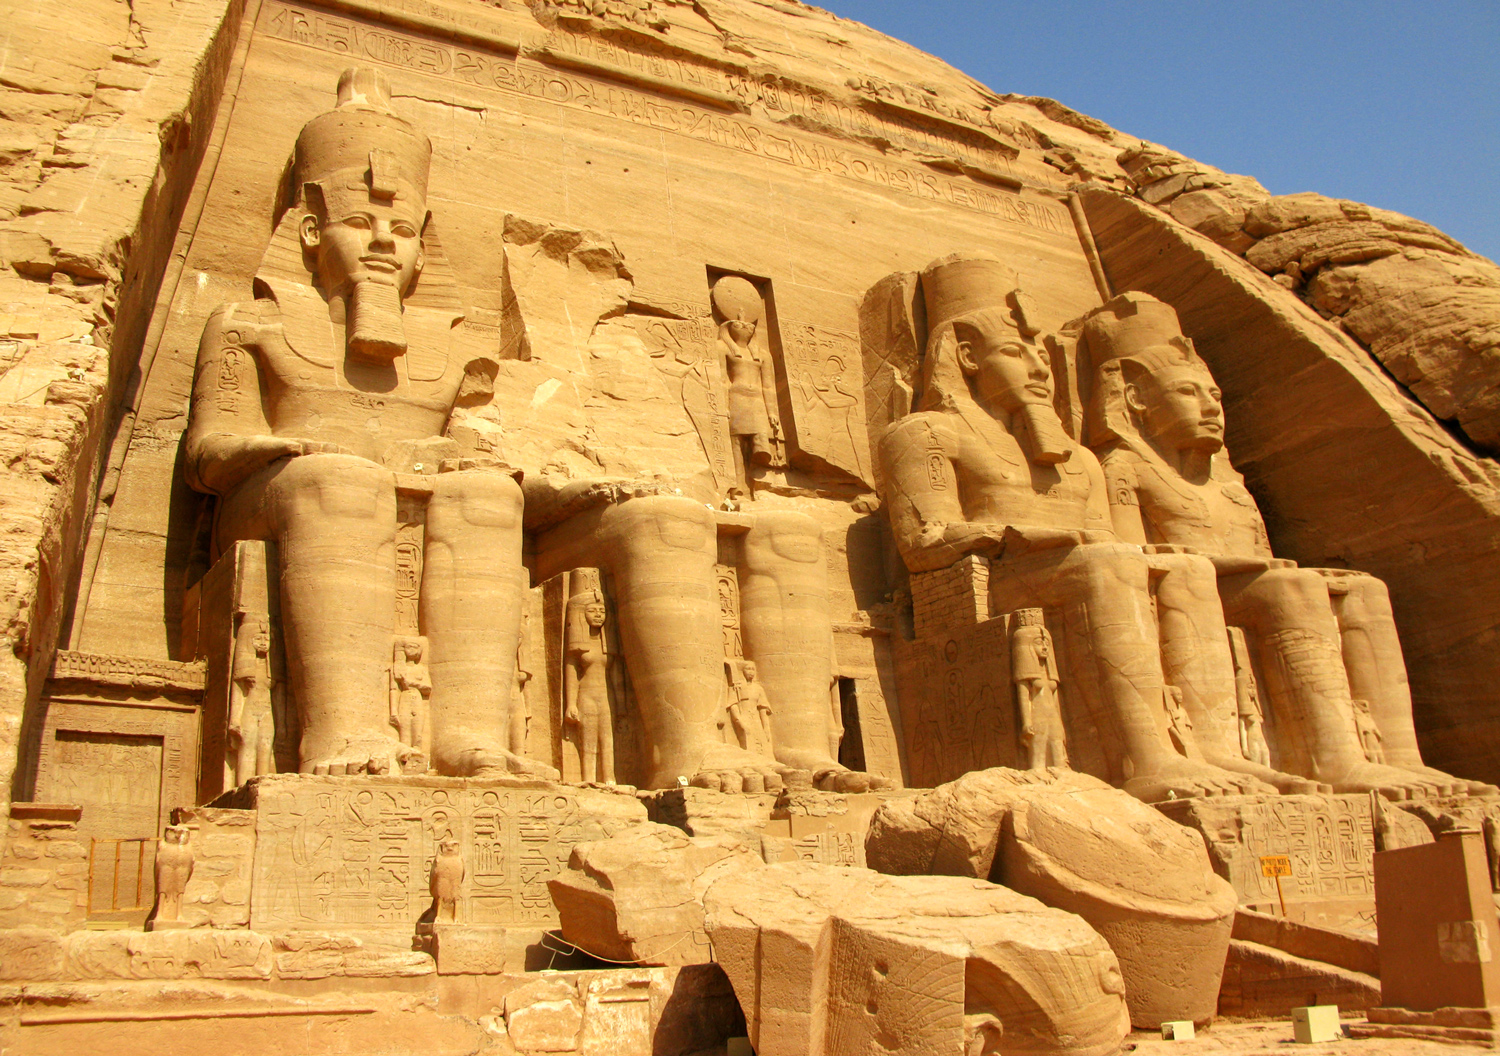 Four statues of a seated pharaoh are at the entrance to the temple of Ramses II.